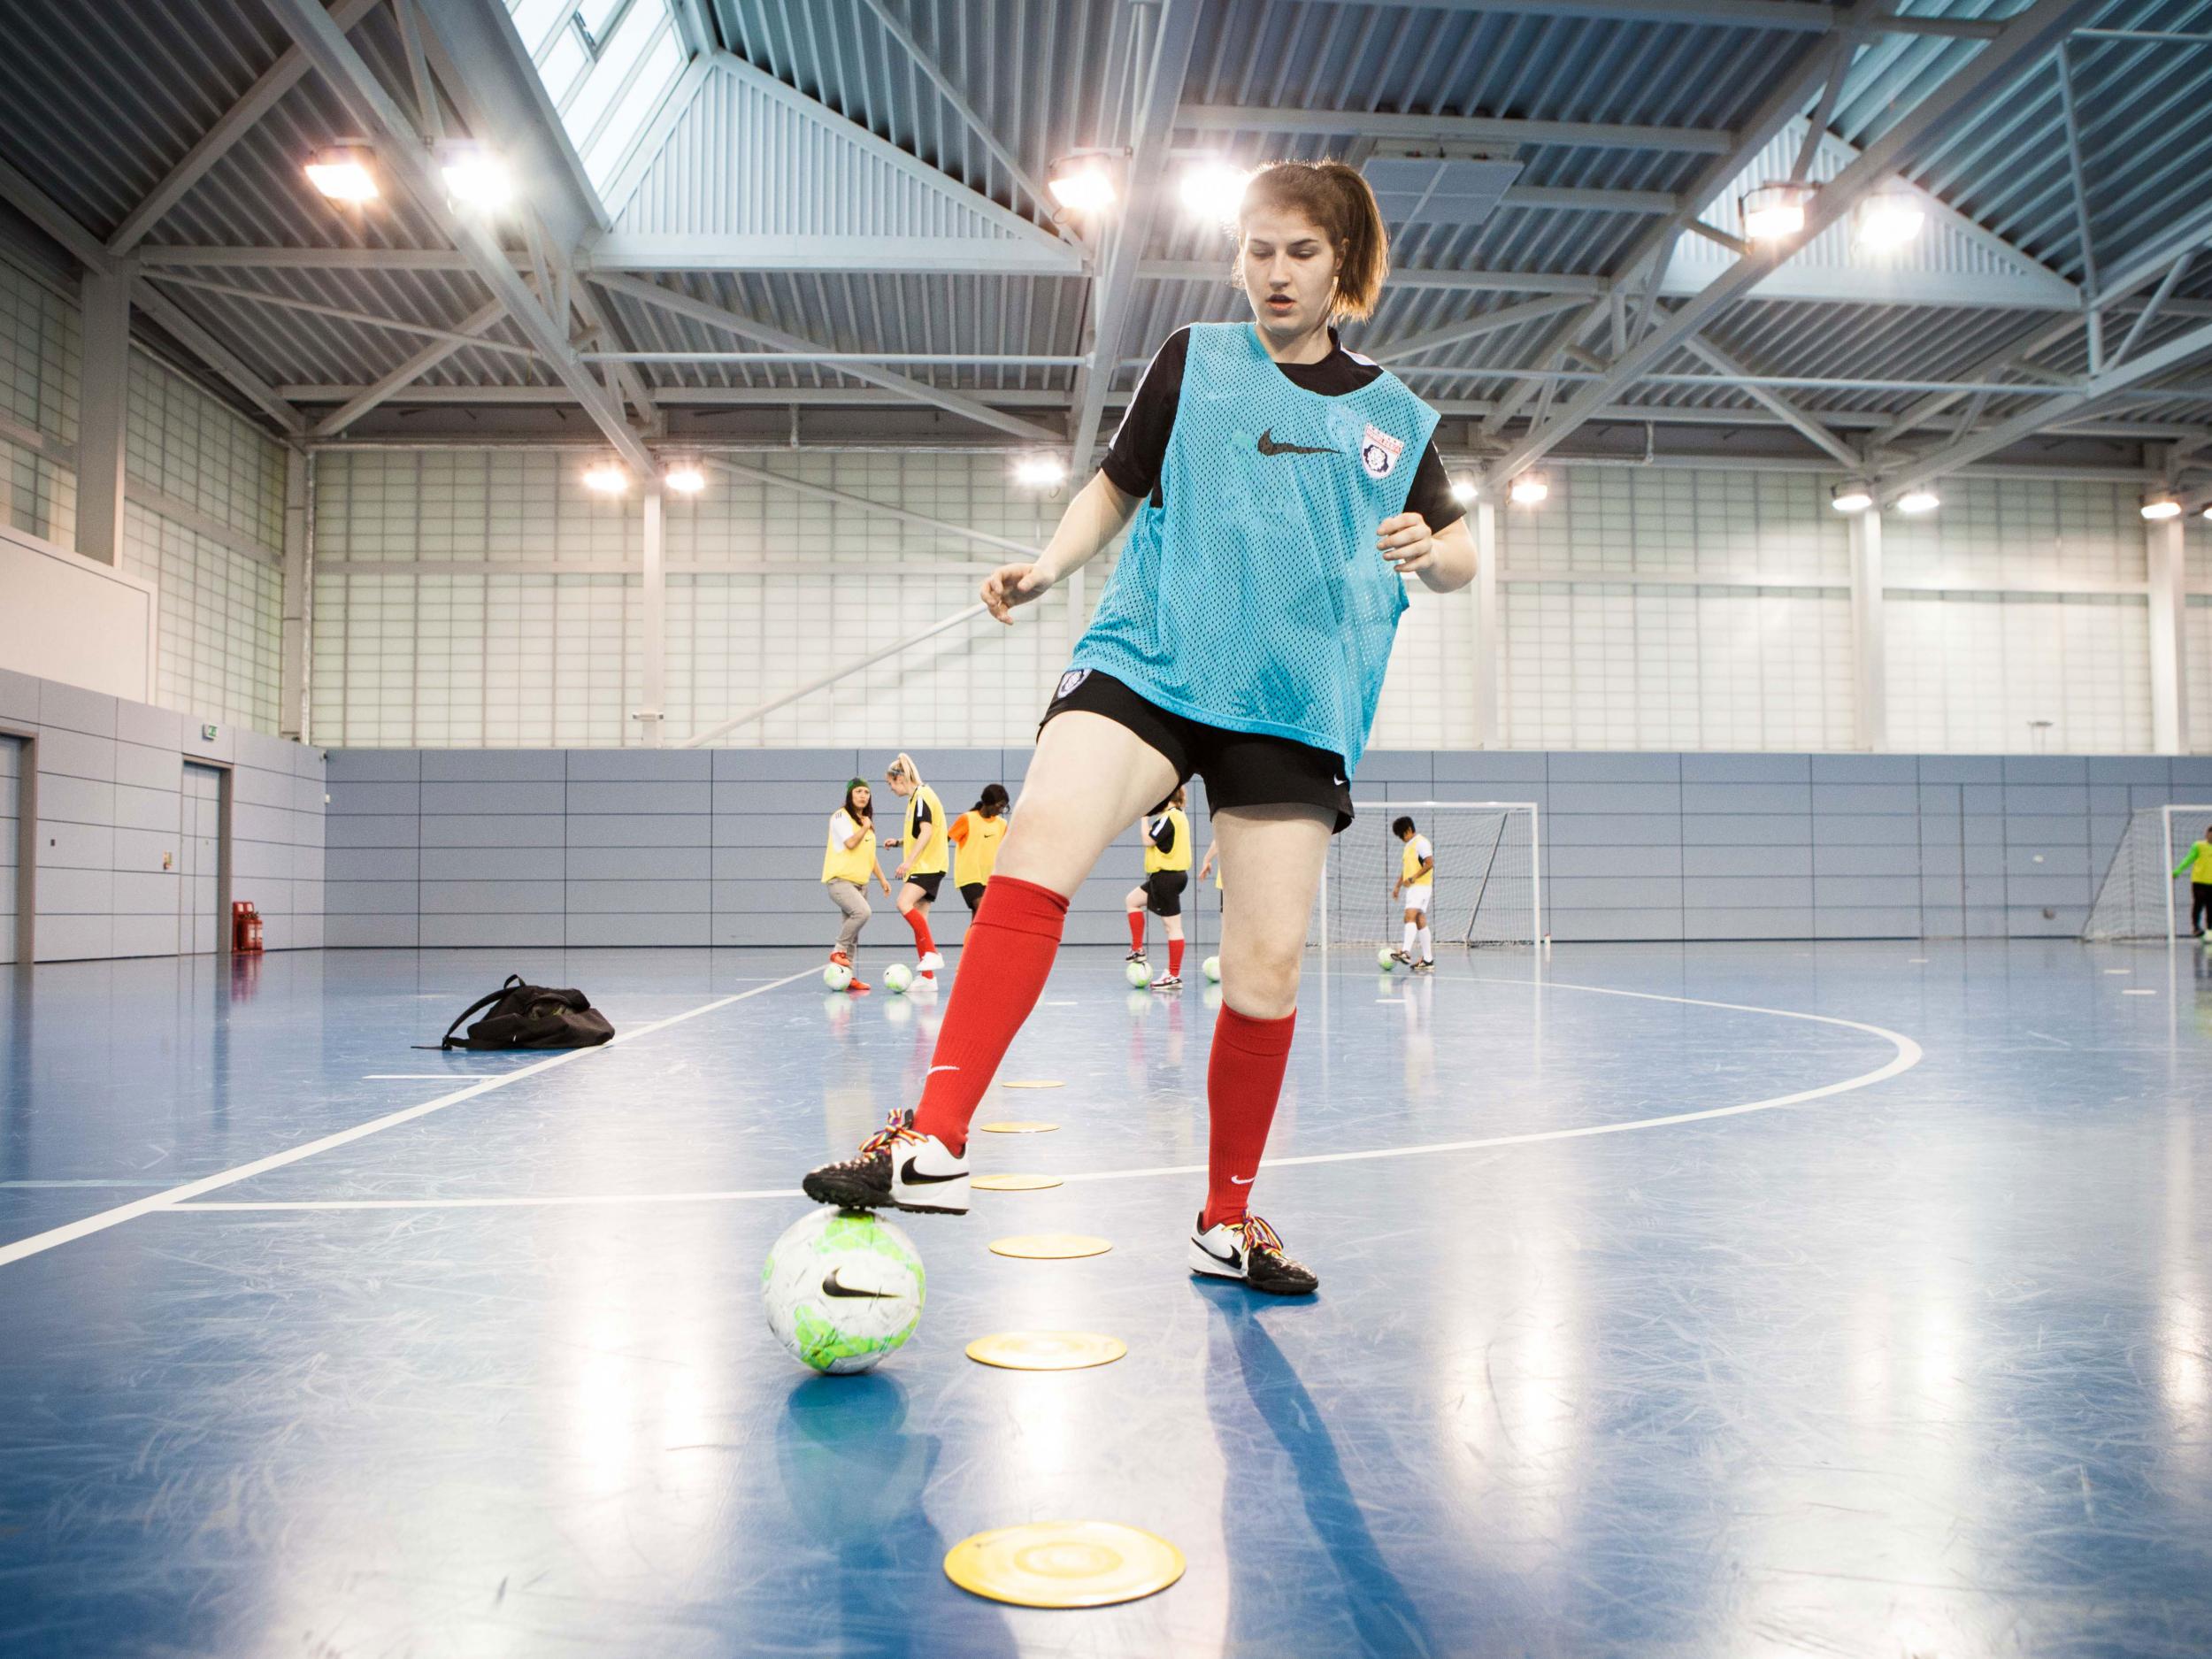 In 2015 Natasha was also selected for the Street Football Association's Team England